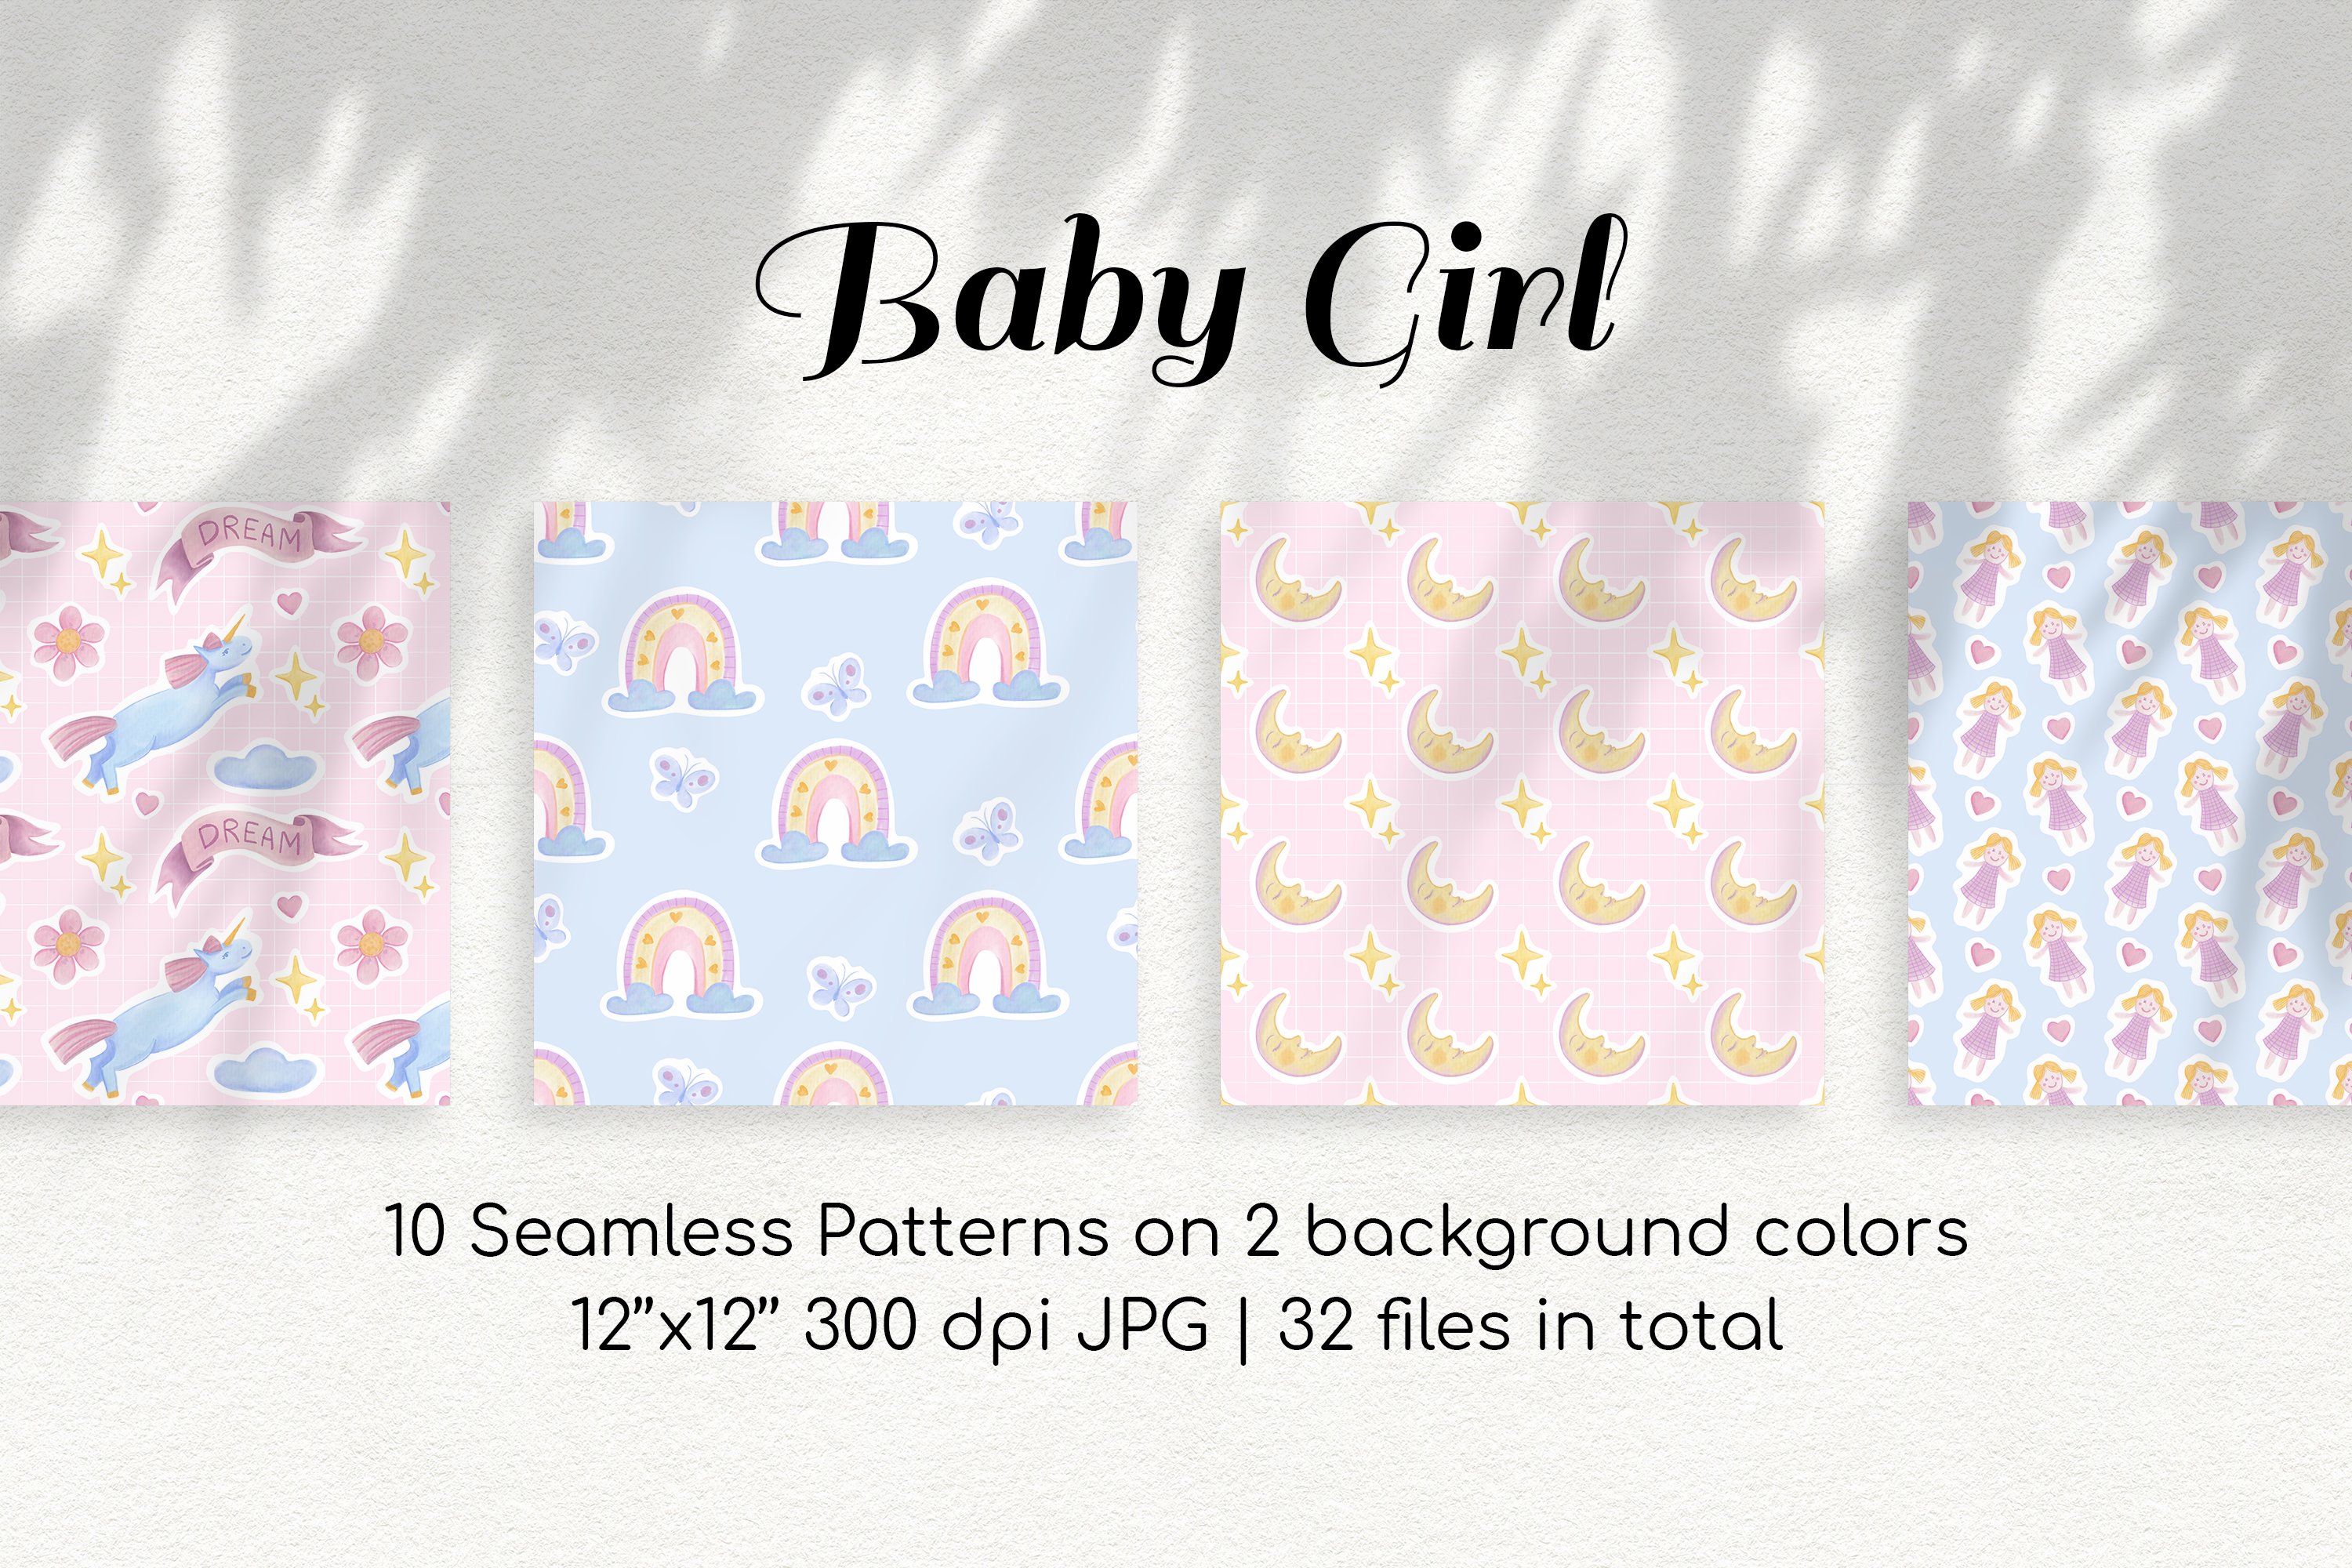 Baby Girl Dreams Seamless Patterns cover image.